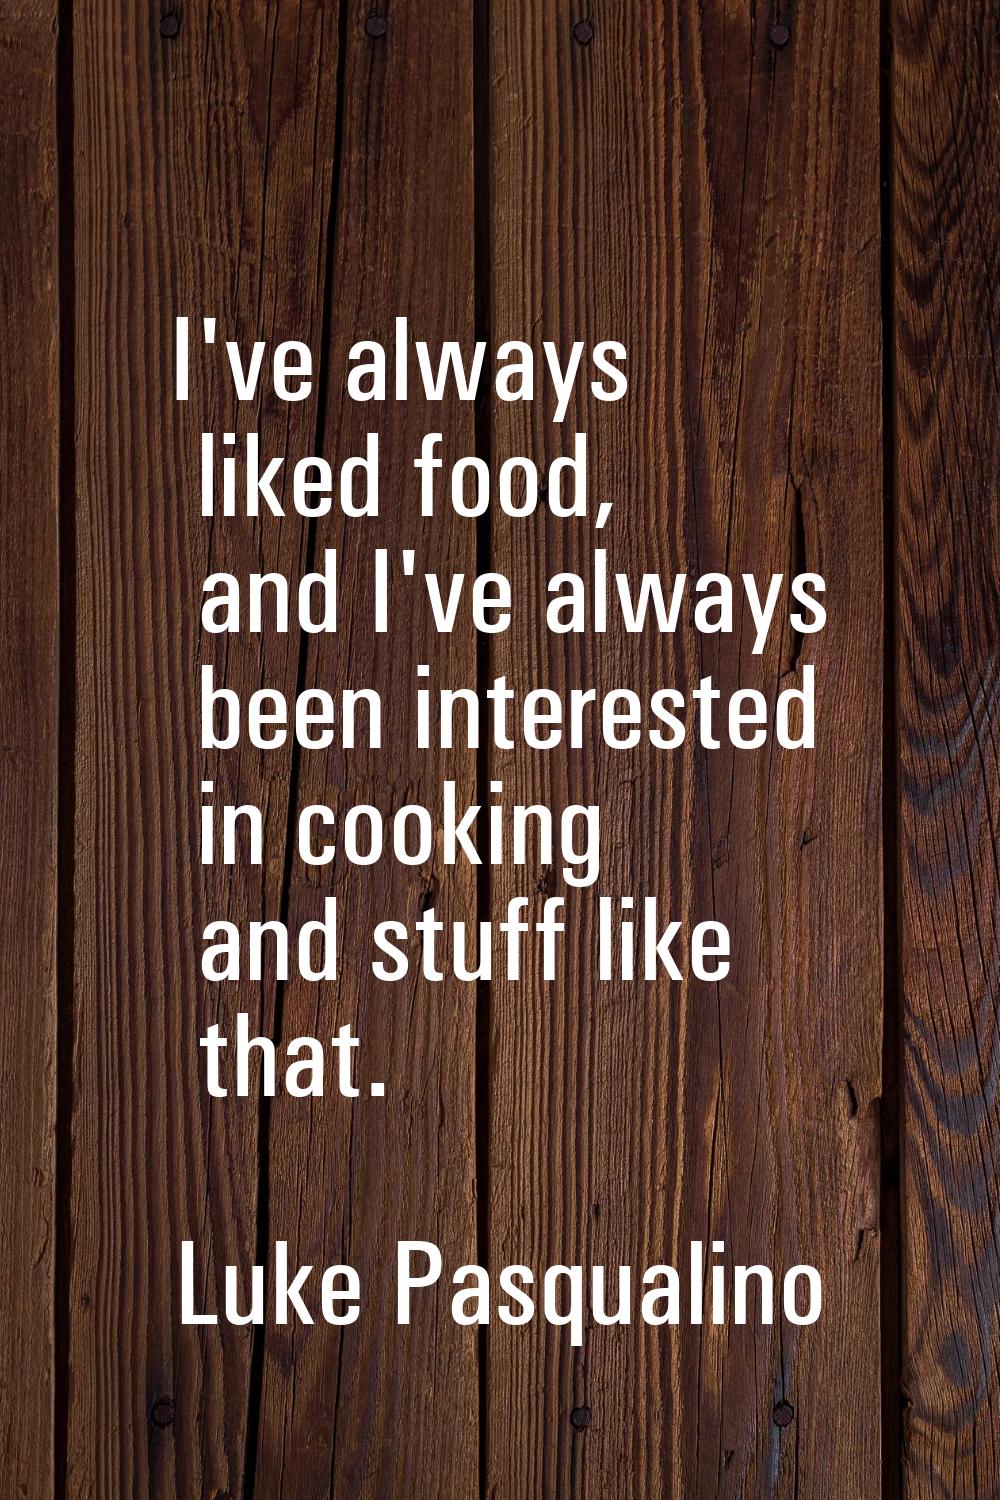 I've always liked food, and I've always been interested in cooking and stuff like that.